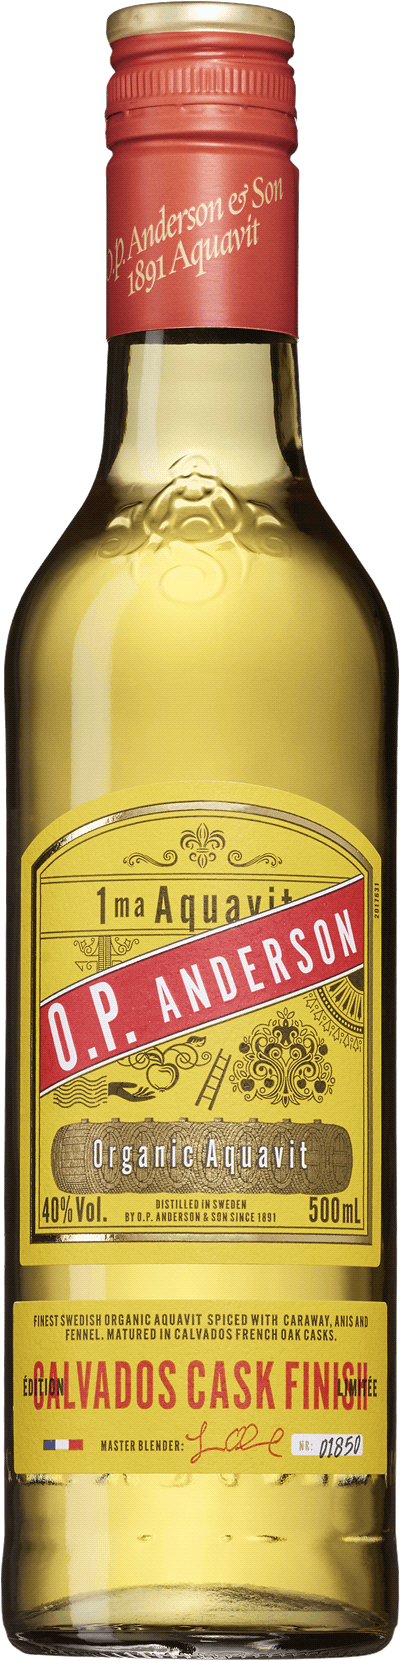 O.P. Anderson Calvados Cask Finish Limited Edition